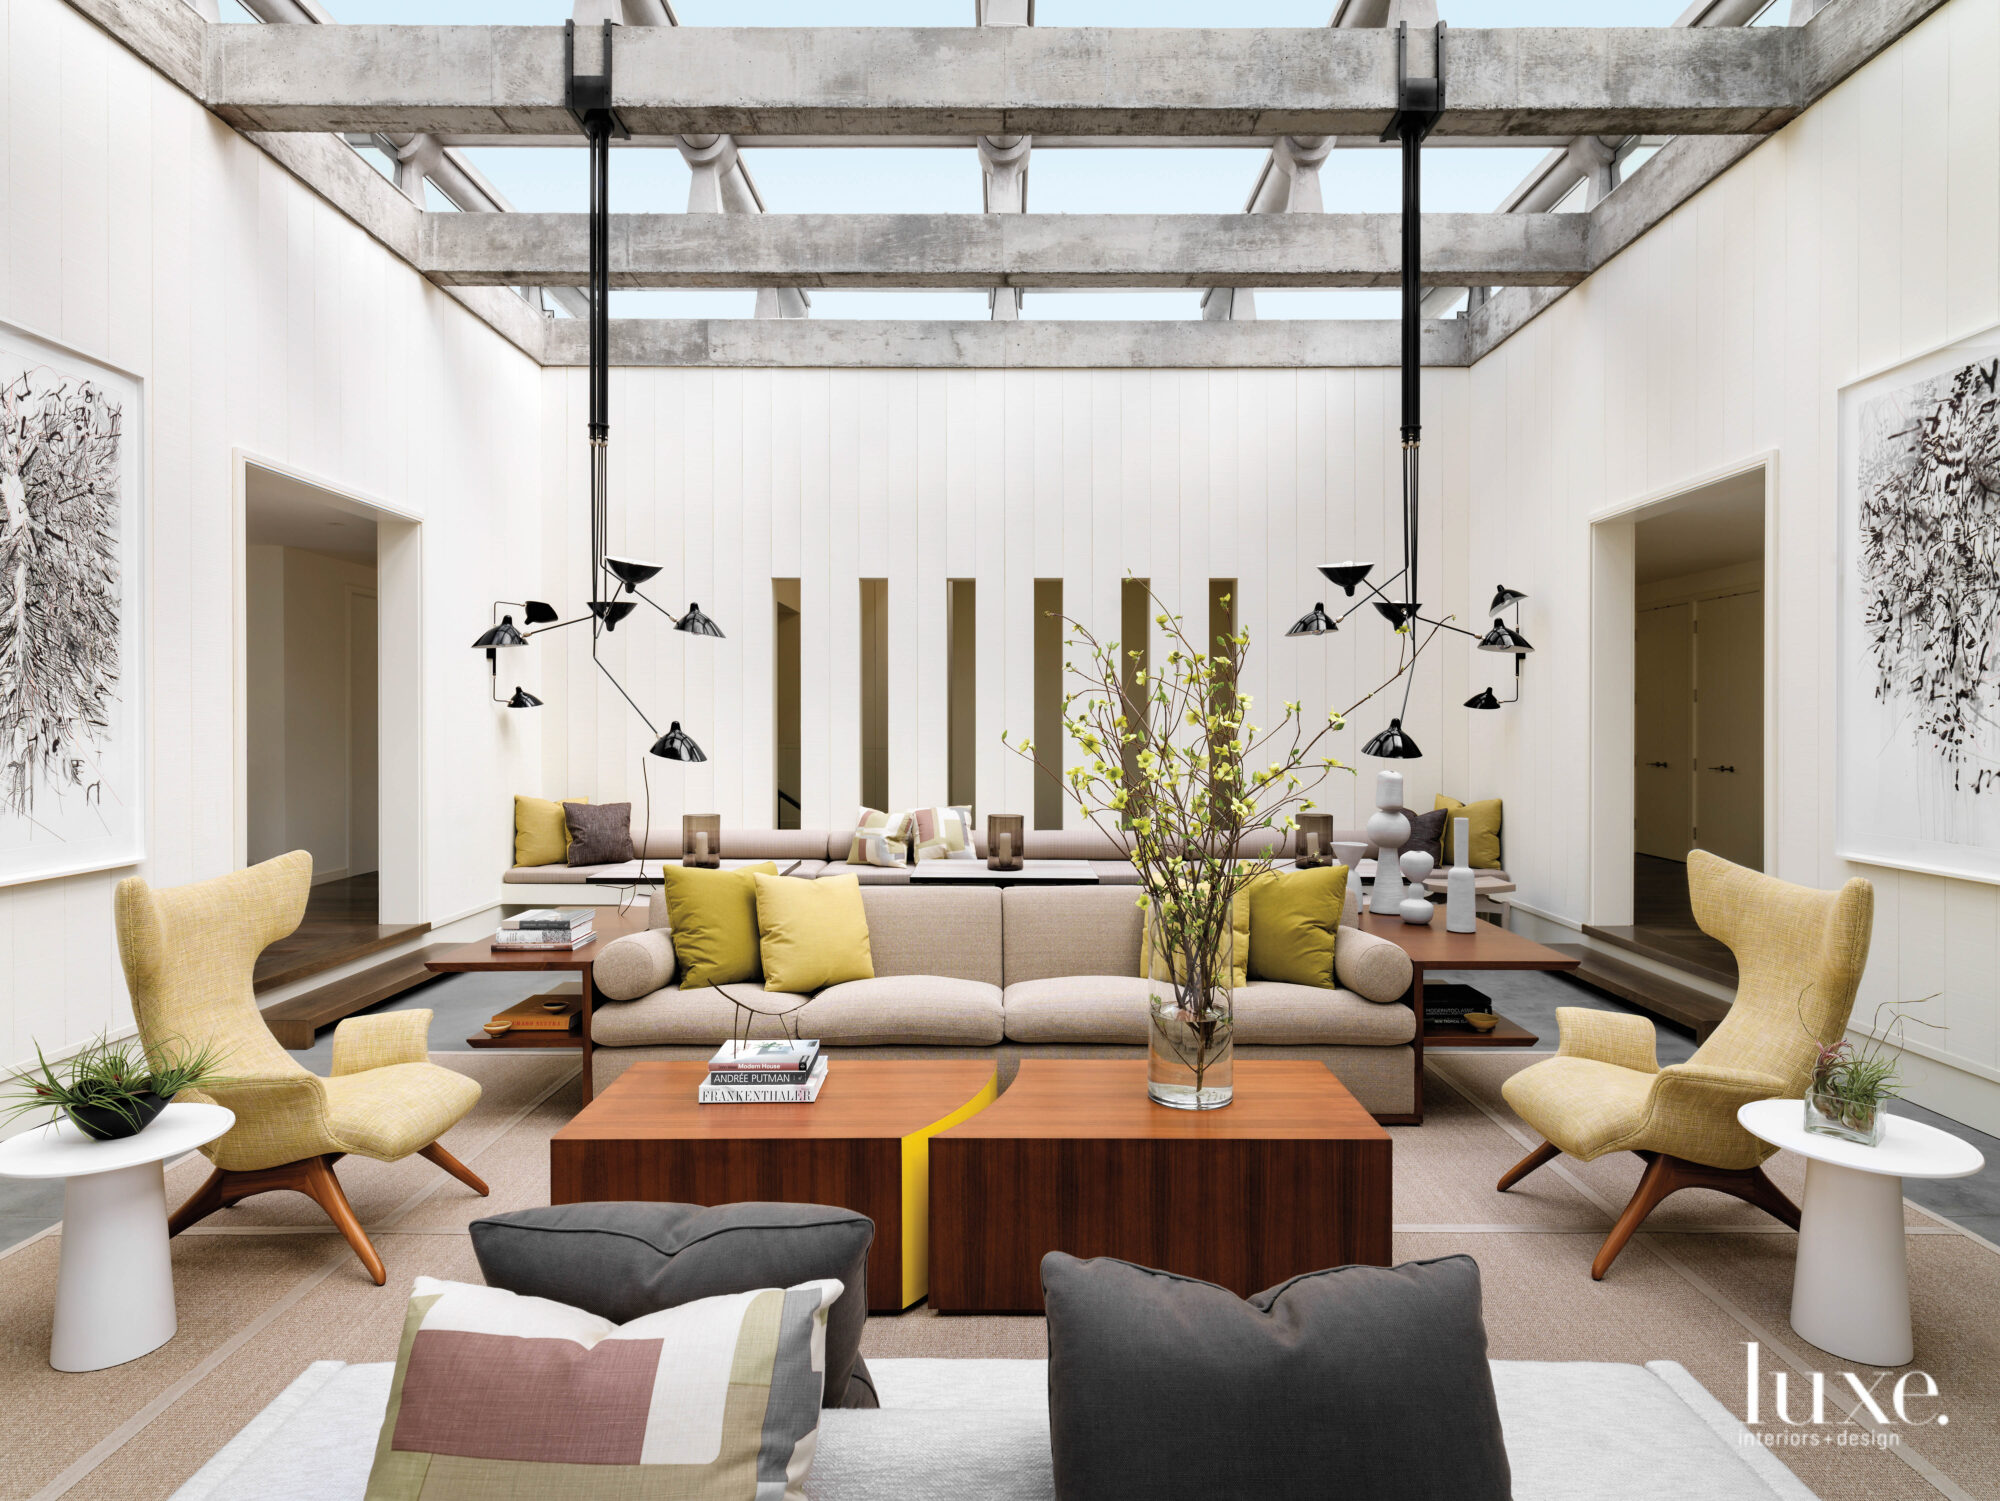 The living area is an atrium with a glass roof.